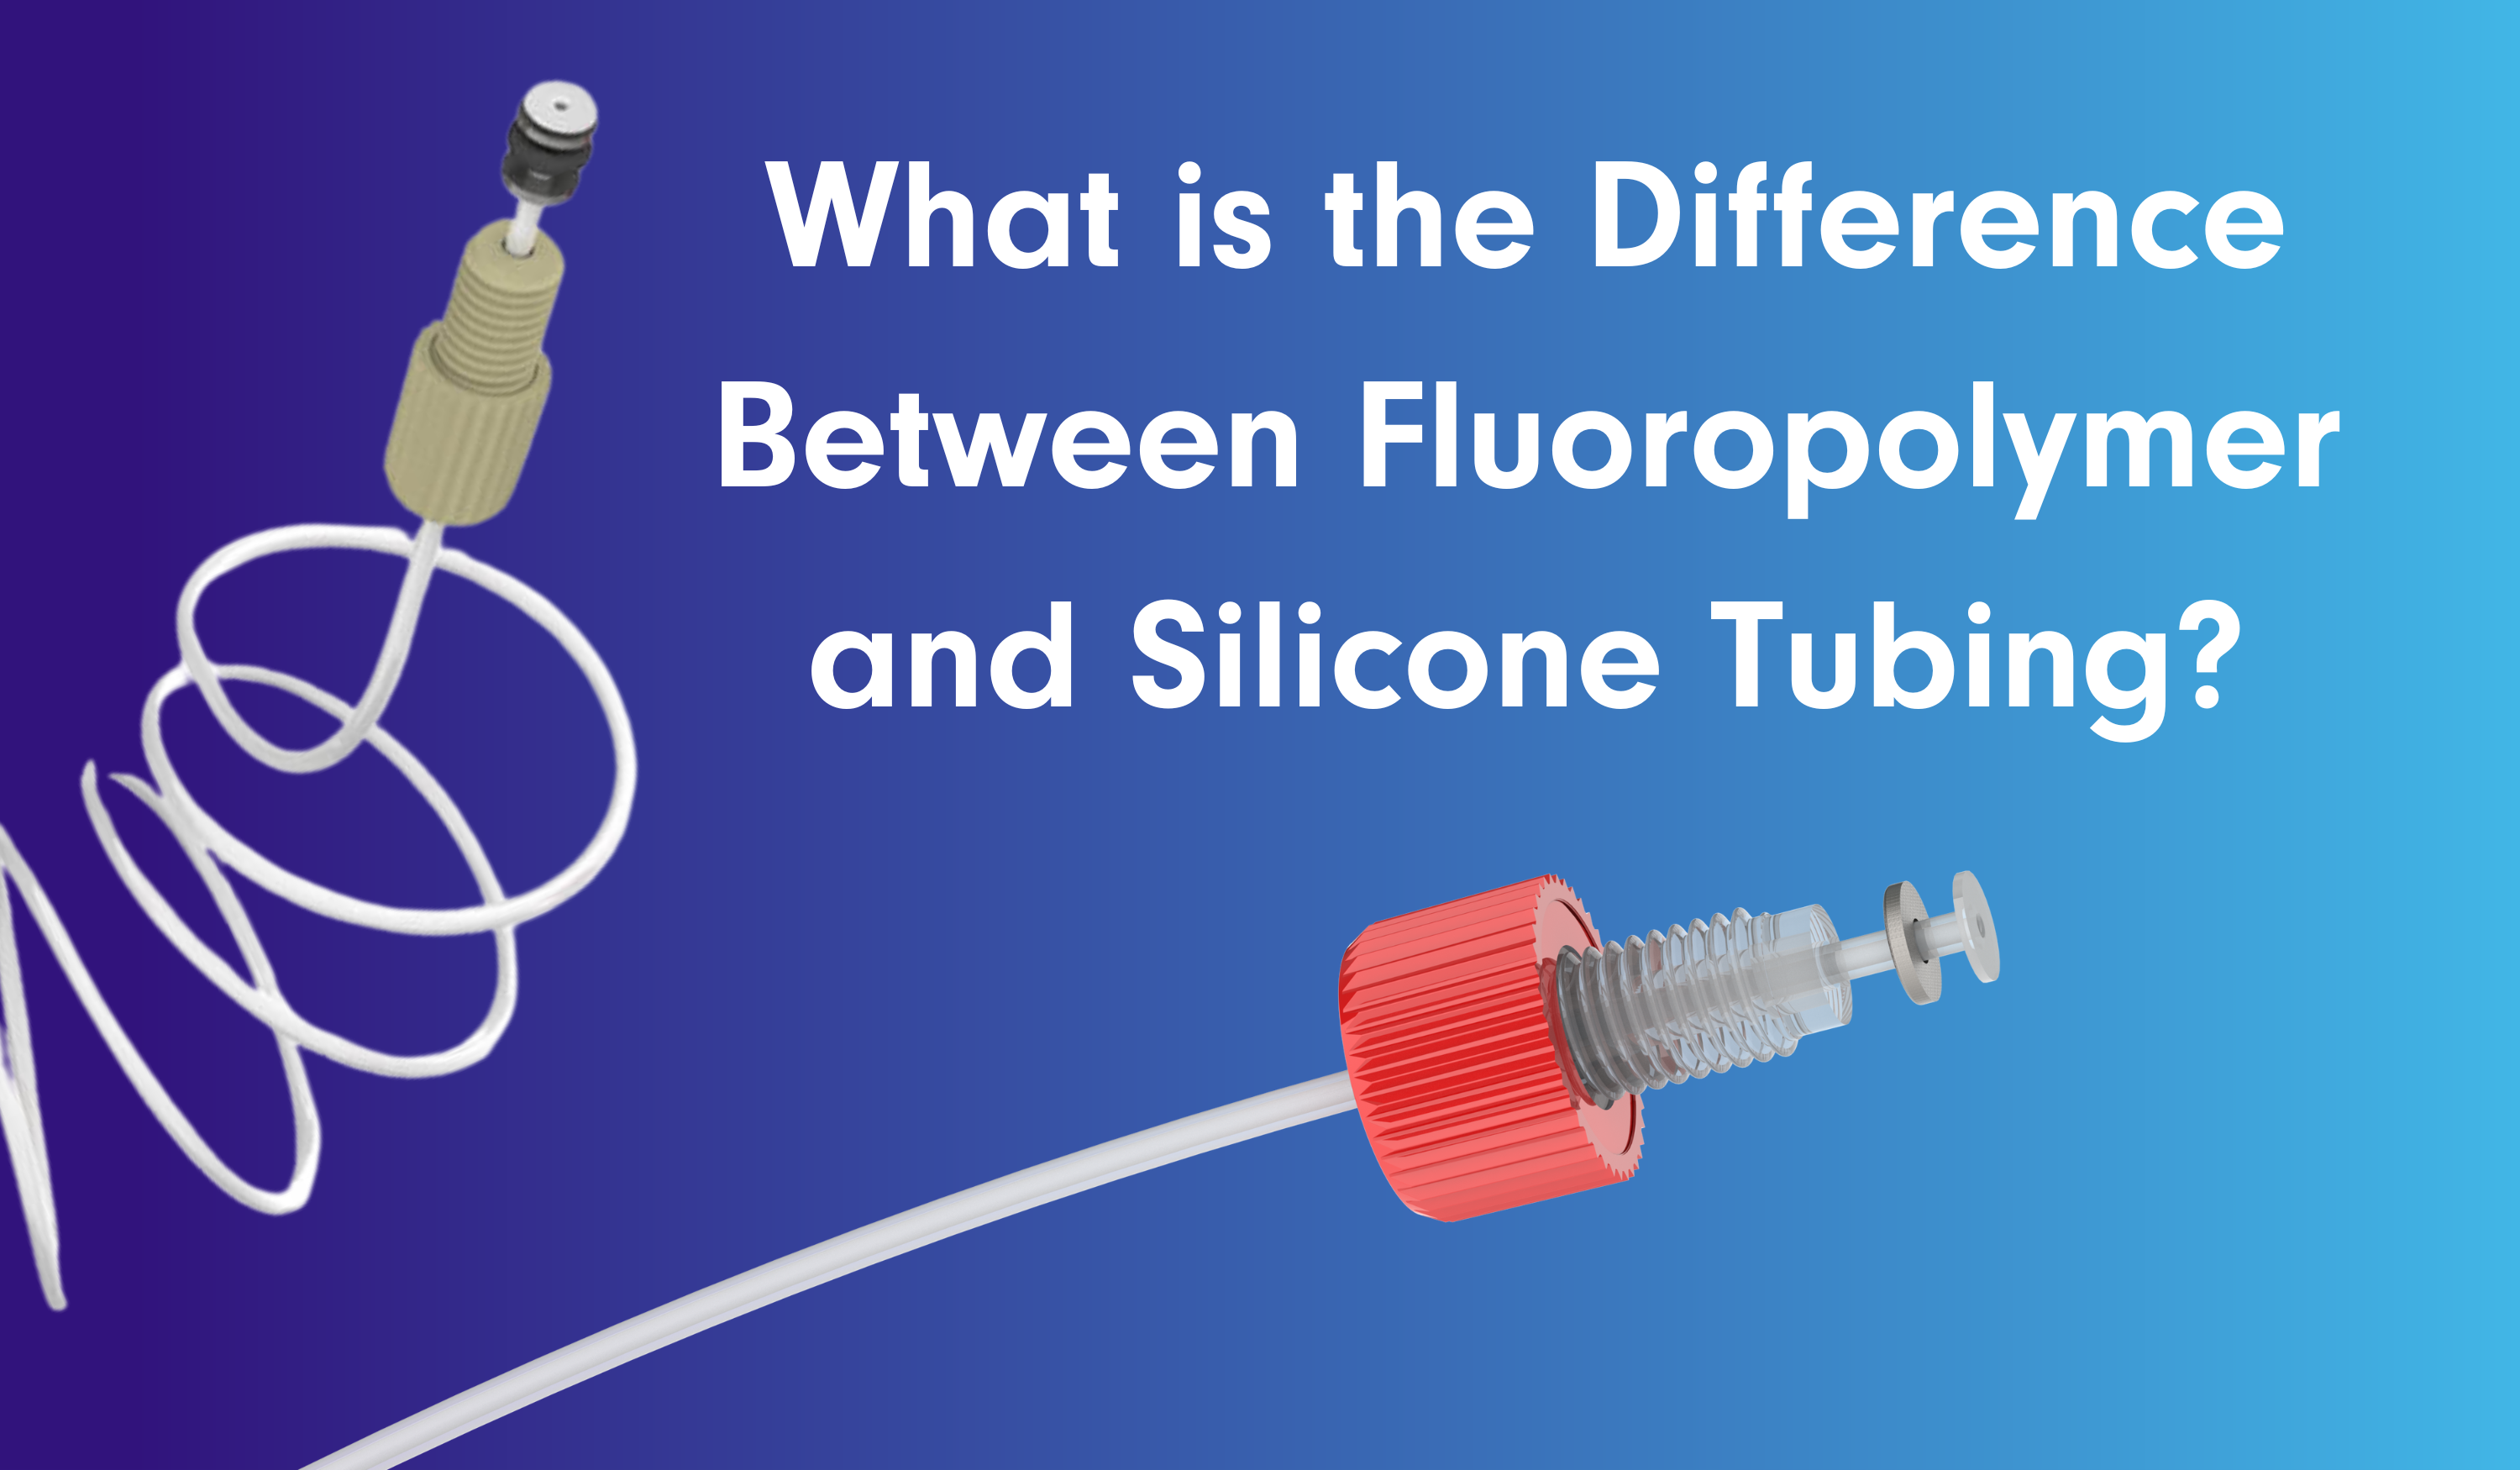 What is the Difference Between Fluoropolymer and Silicone Tubing? Image